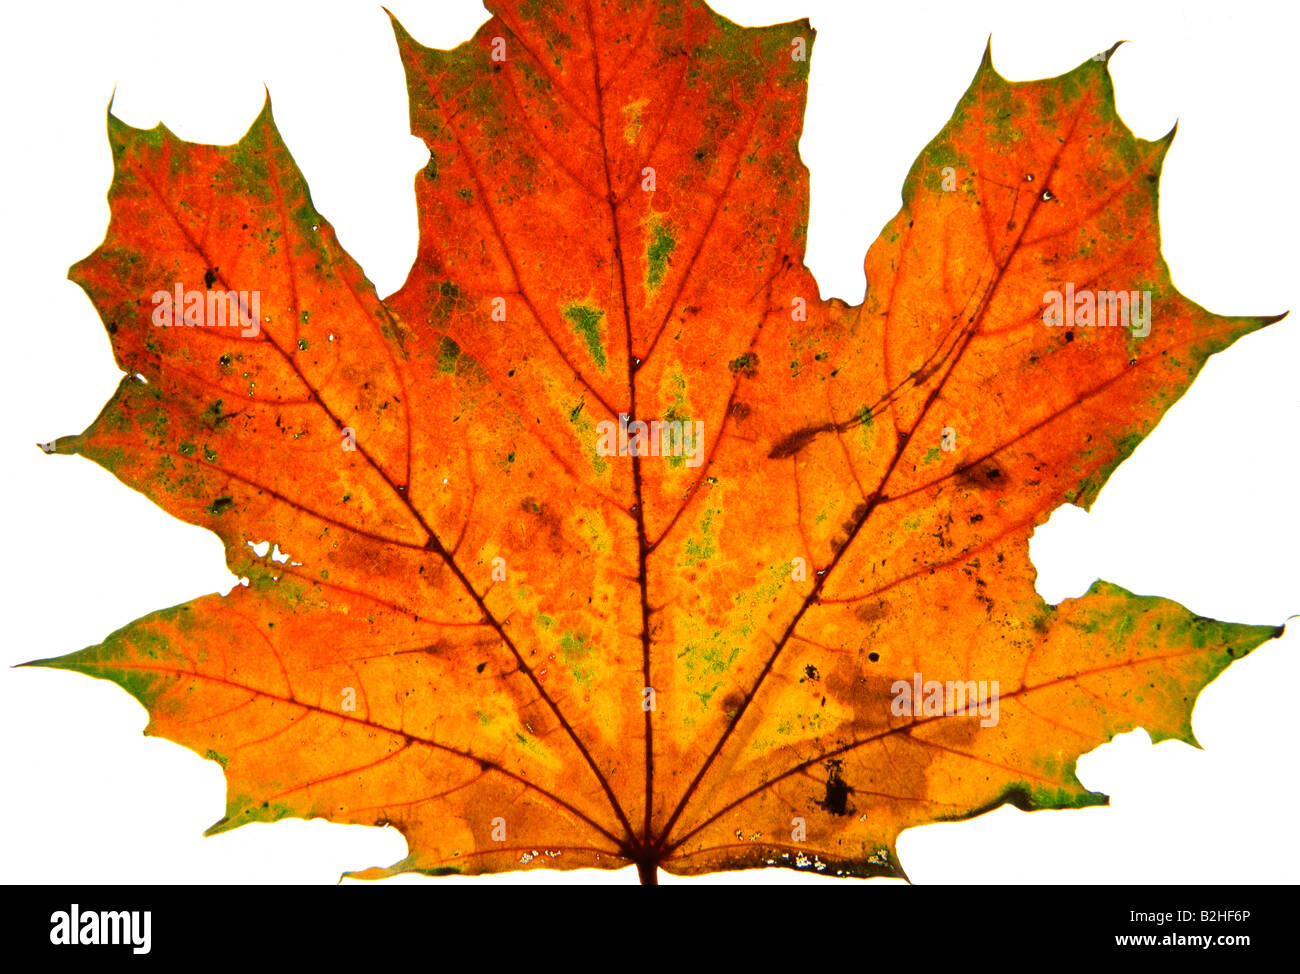 maple tree leave acer afterimage backcloth background image backdrop close up pattern patterns Stock Photo